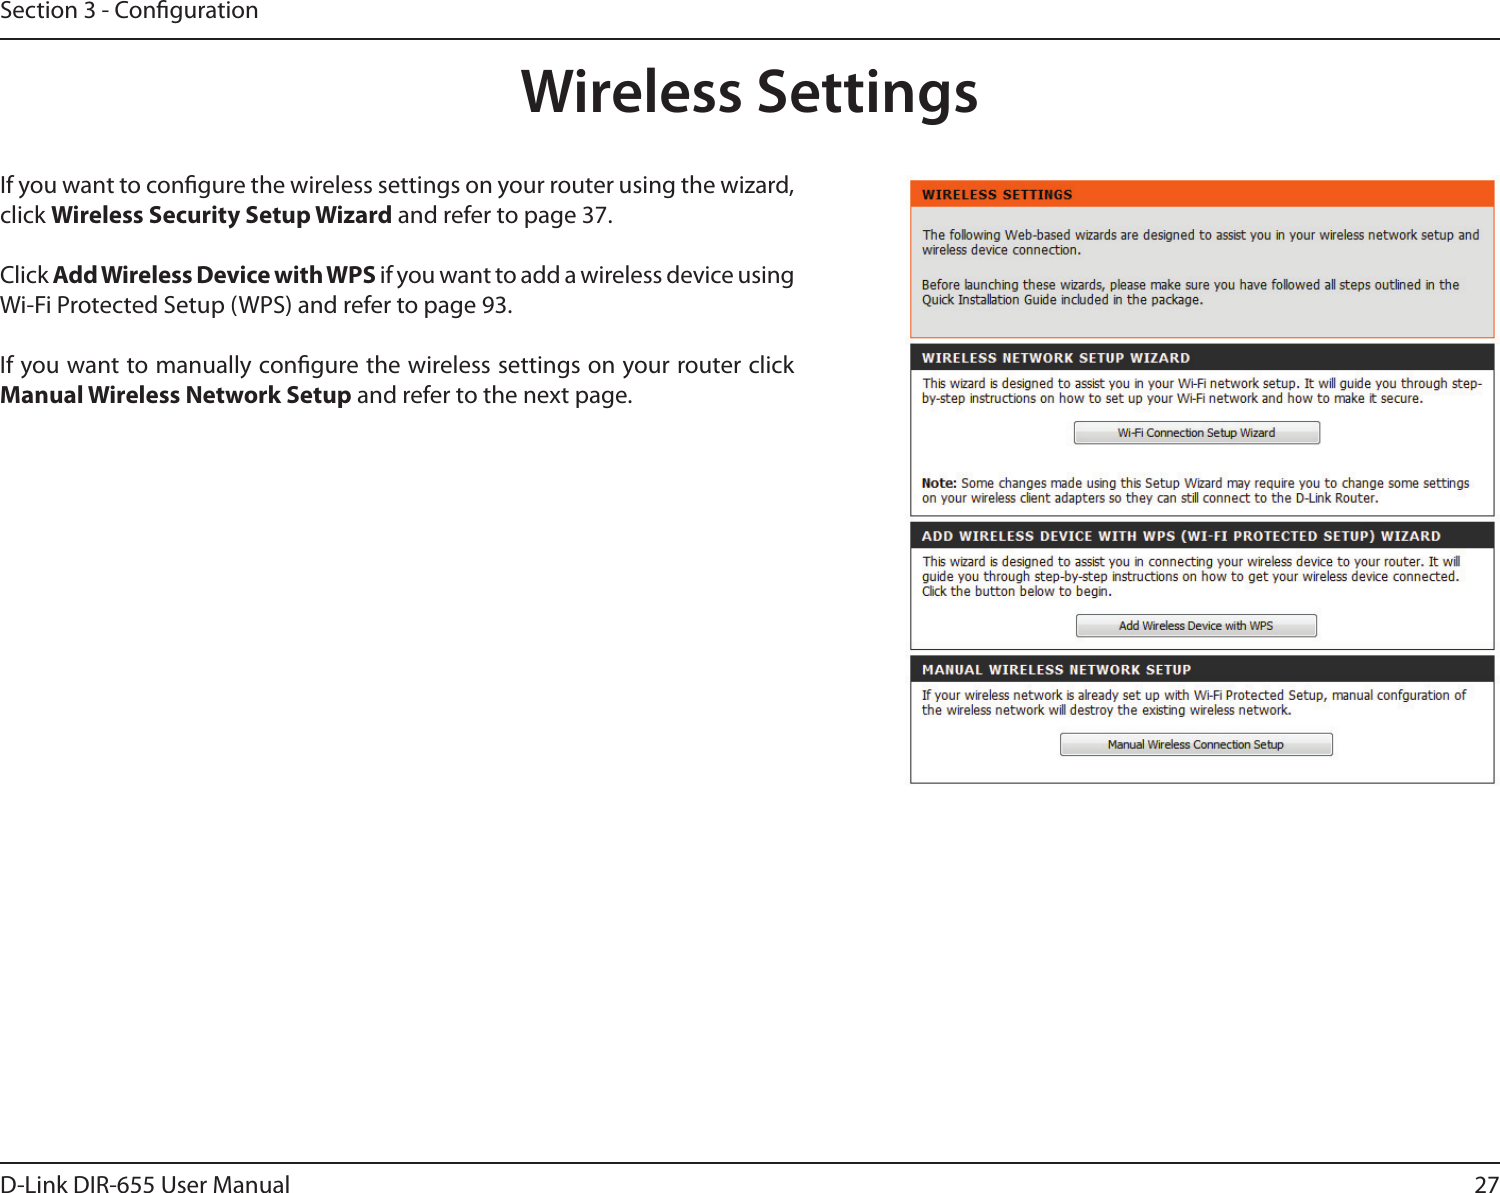 27D-Link DIR-655 User ManualSection 3 - CongurationWireless SettingsIf you want to congure the wireless settings on your router using the wizard, click Wireless Security Setup Wizard and refer to page 37.Click Add Wireless Device with WPS if you want to add a wireless device using Wi-Fi Protected Setup (WPS) and refer to page 93.If you want to manually congure the wireless settings on your router click Manual Wireless Network Setup and refer to the next page.